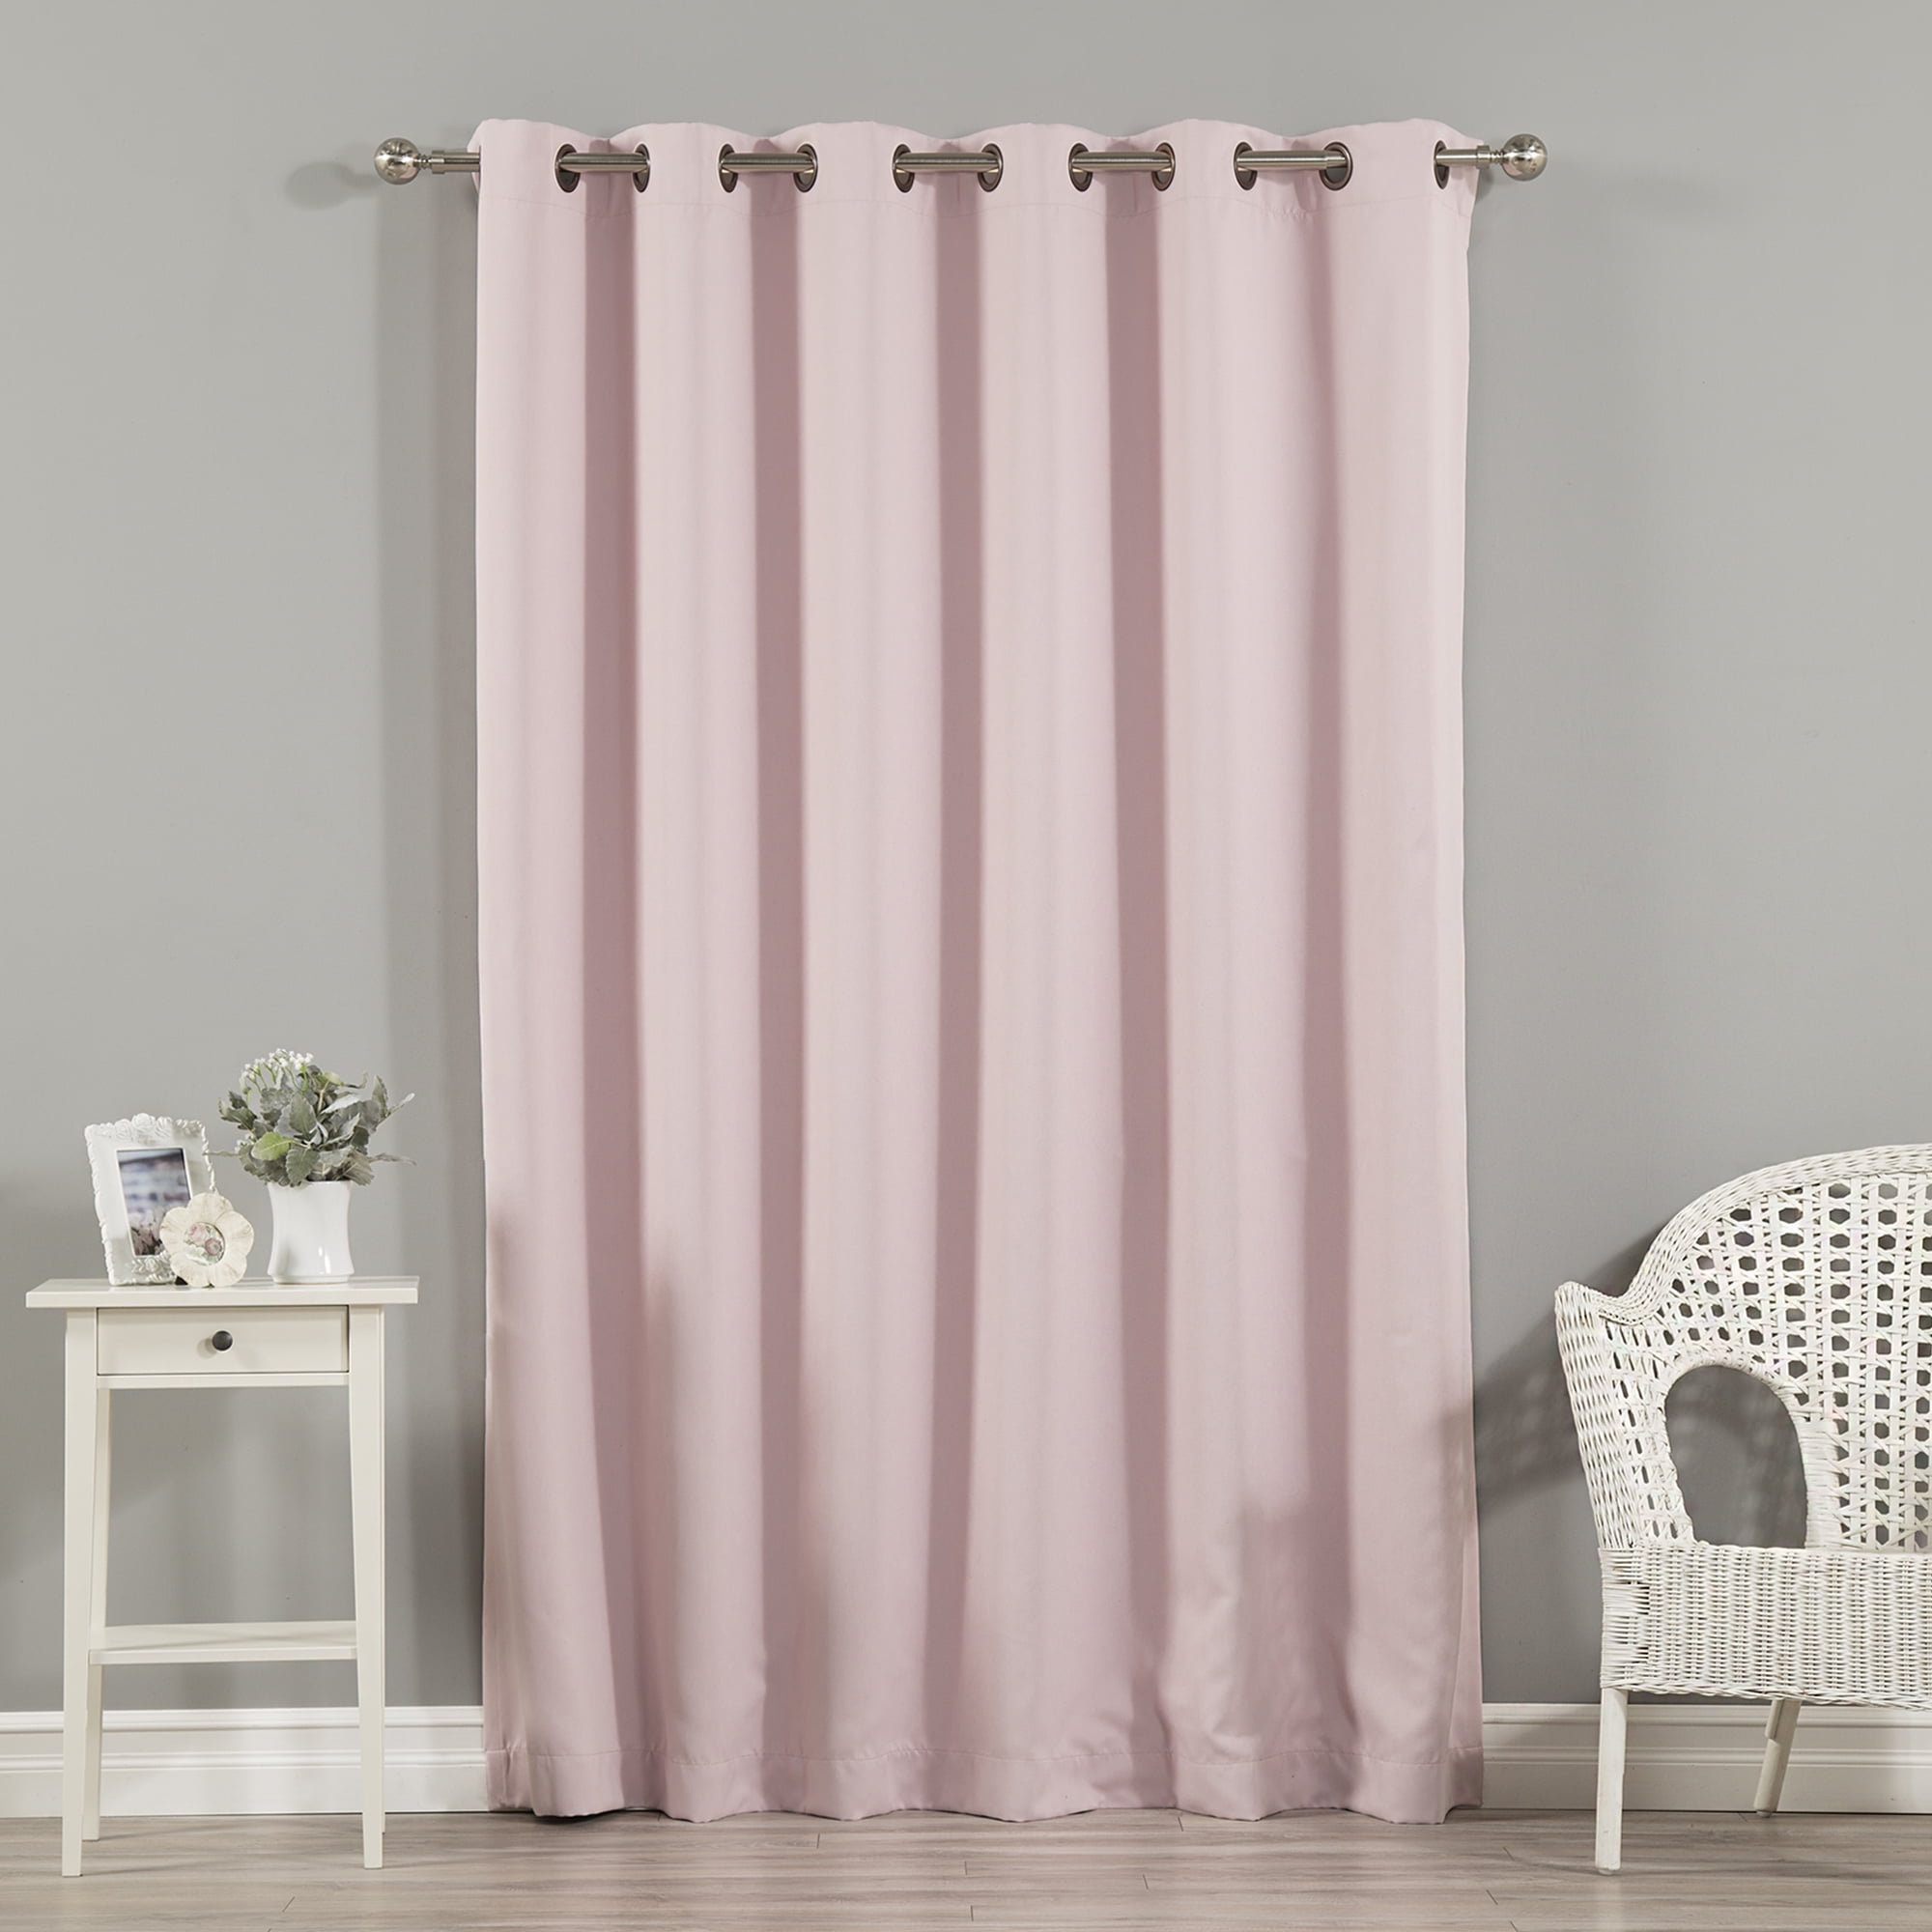 1 Set Heavy Lined Thermal Blackout Grommet Window Curtain Panel ADAM HOT PINK 